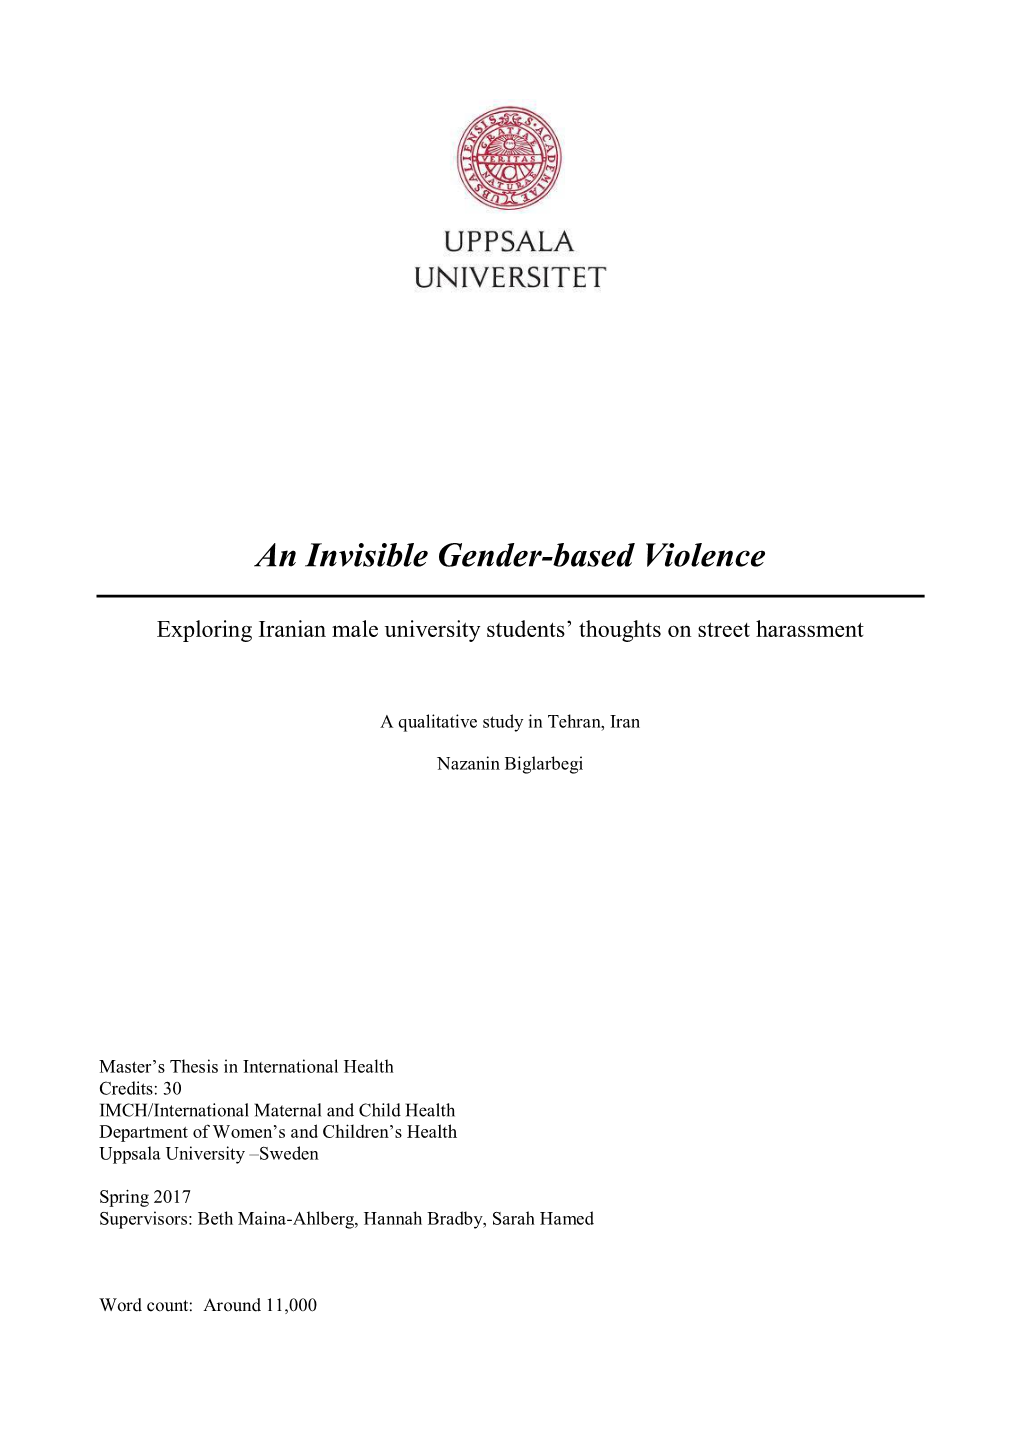 An Invisible Gender-Based Violence